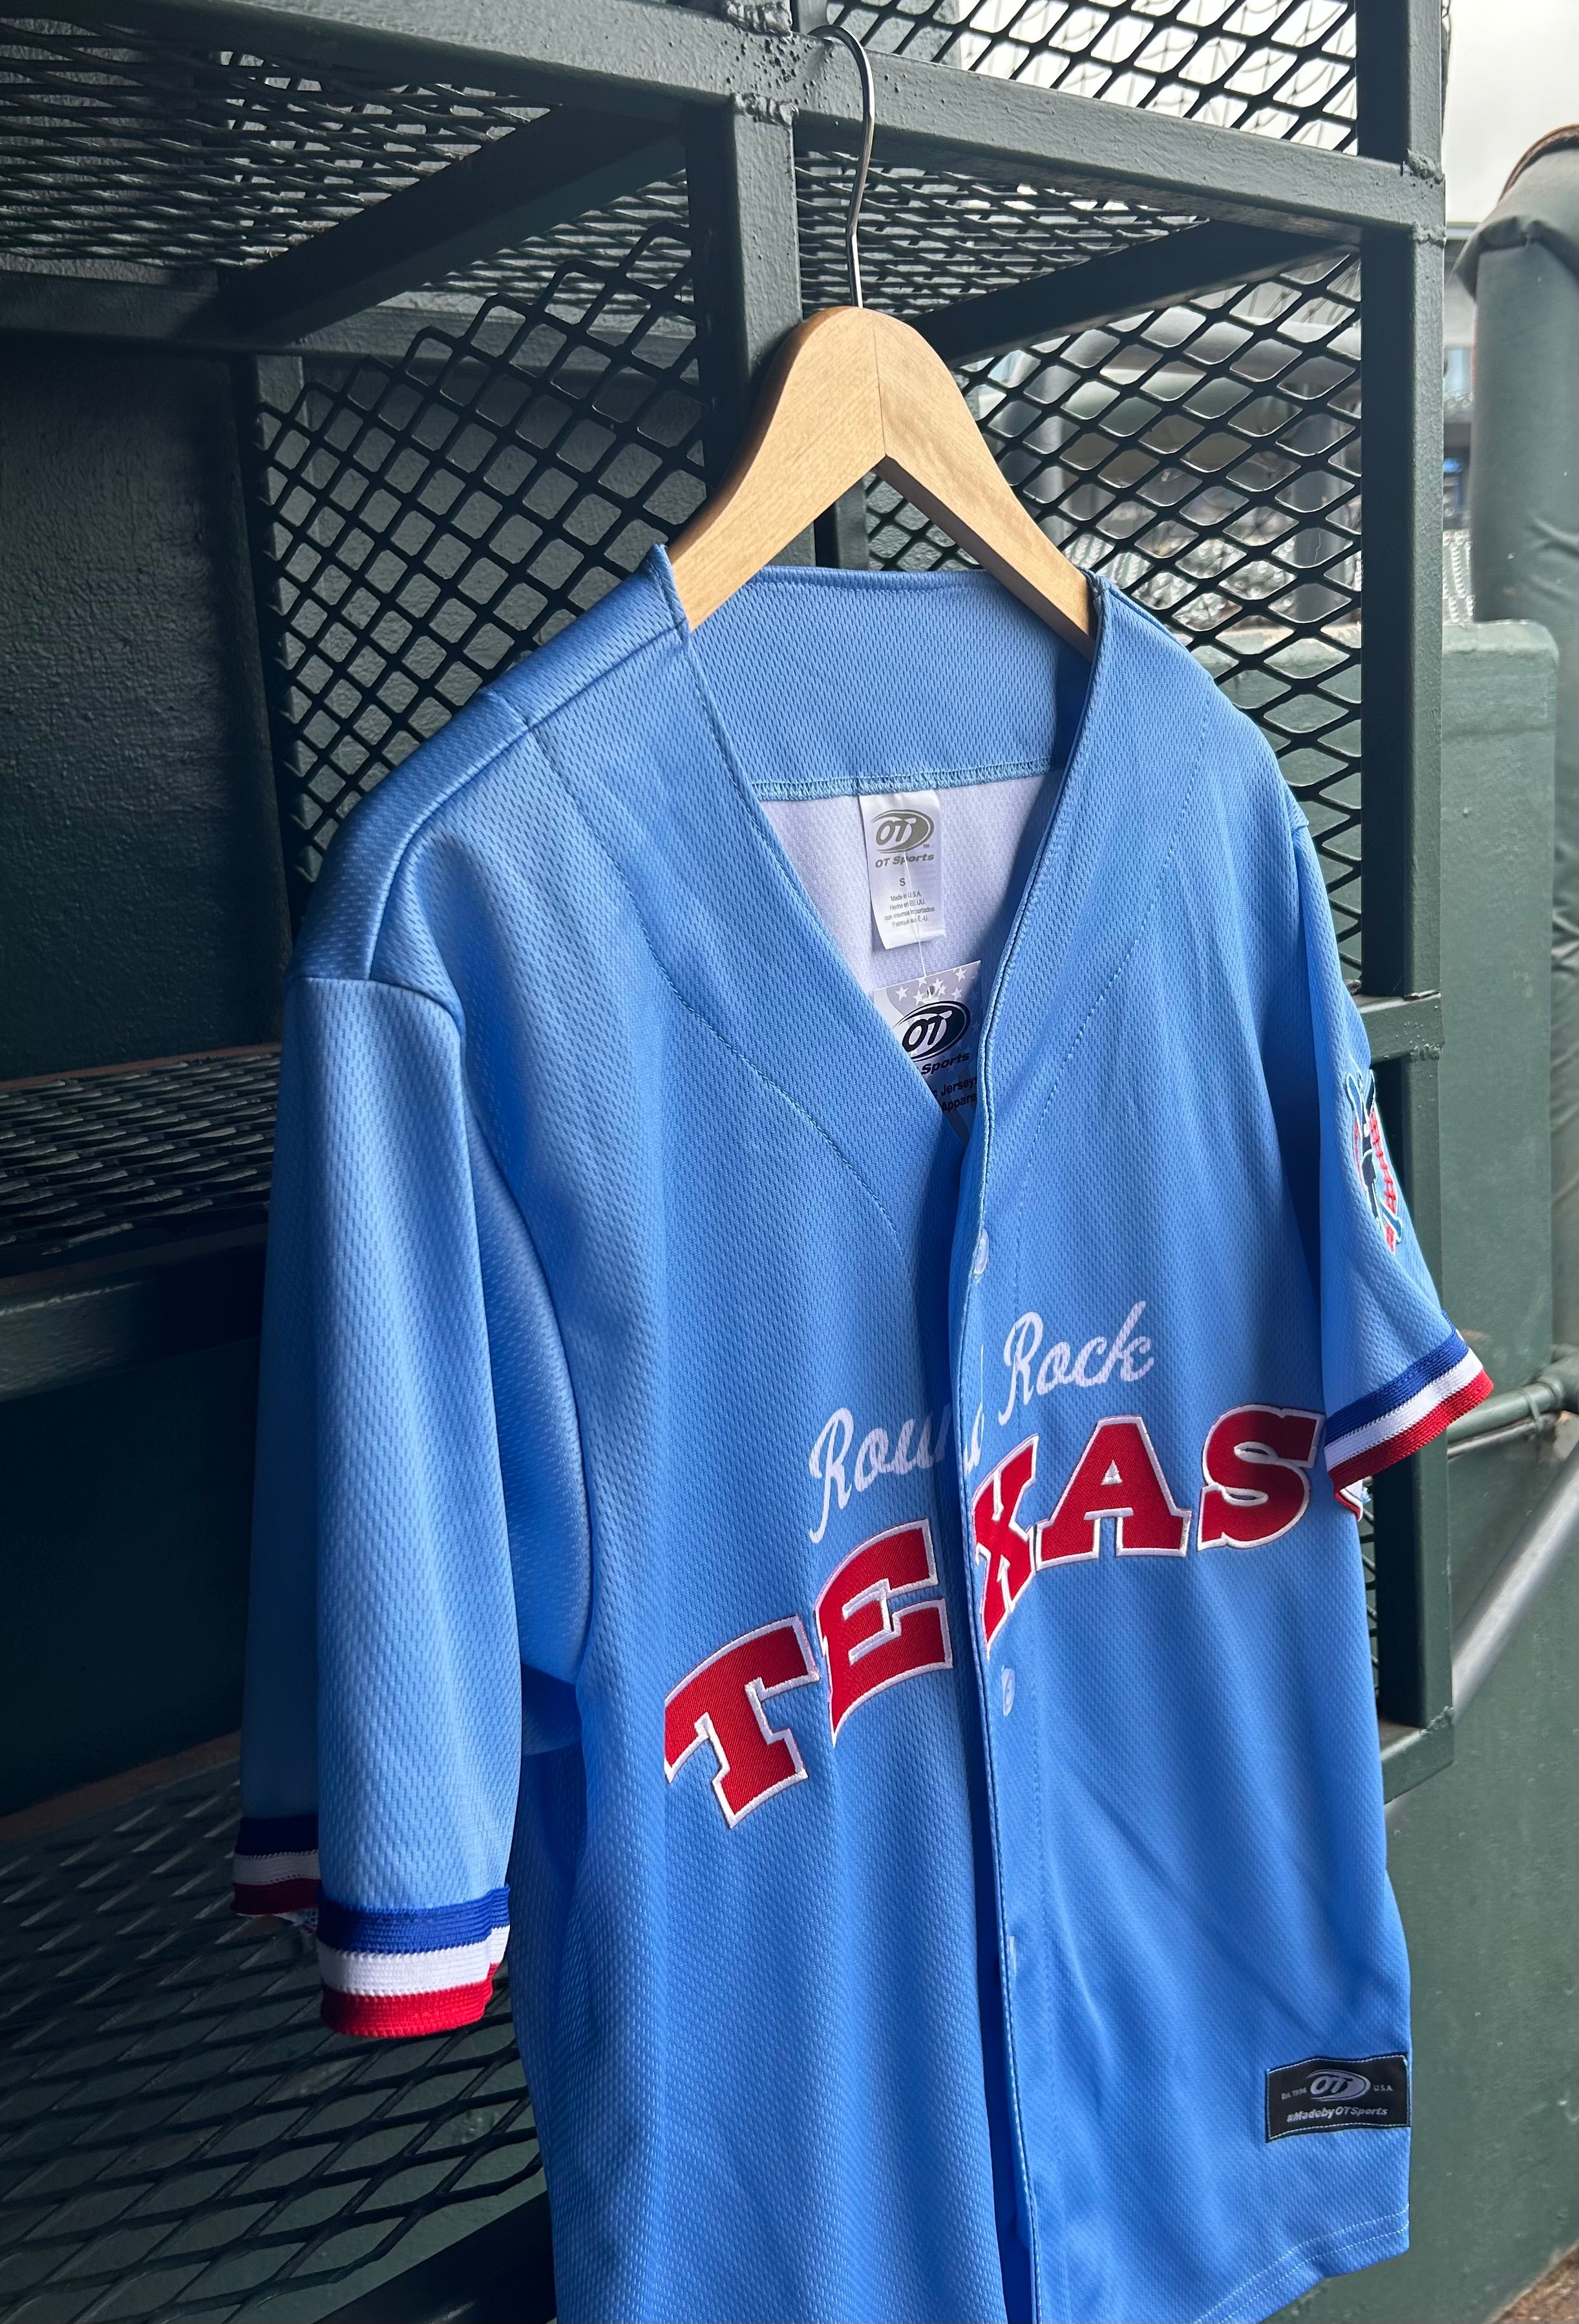 Round Rock Express 2022 Adult Fauxback Jersey Tackle Twill Replica XL